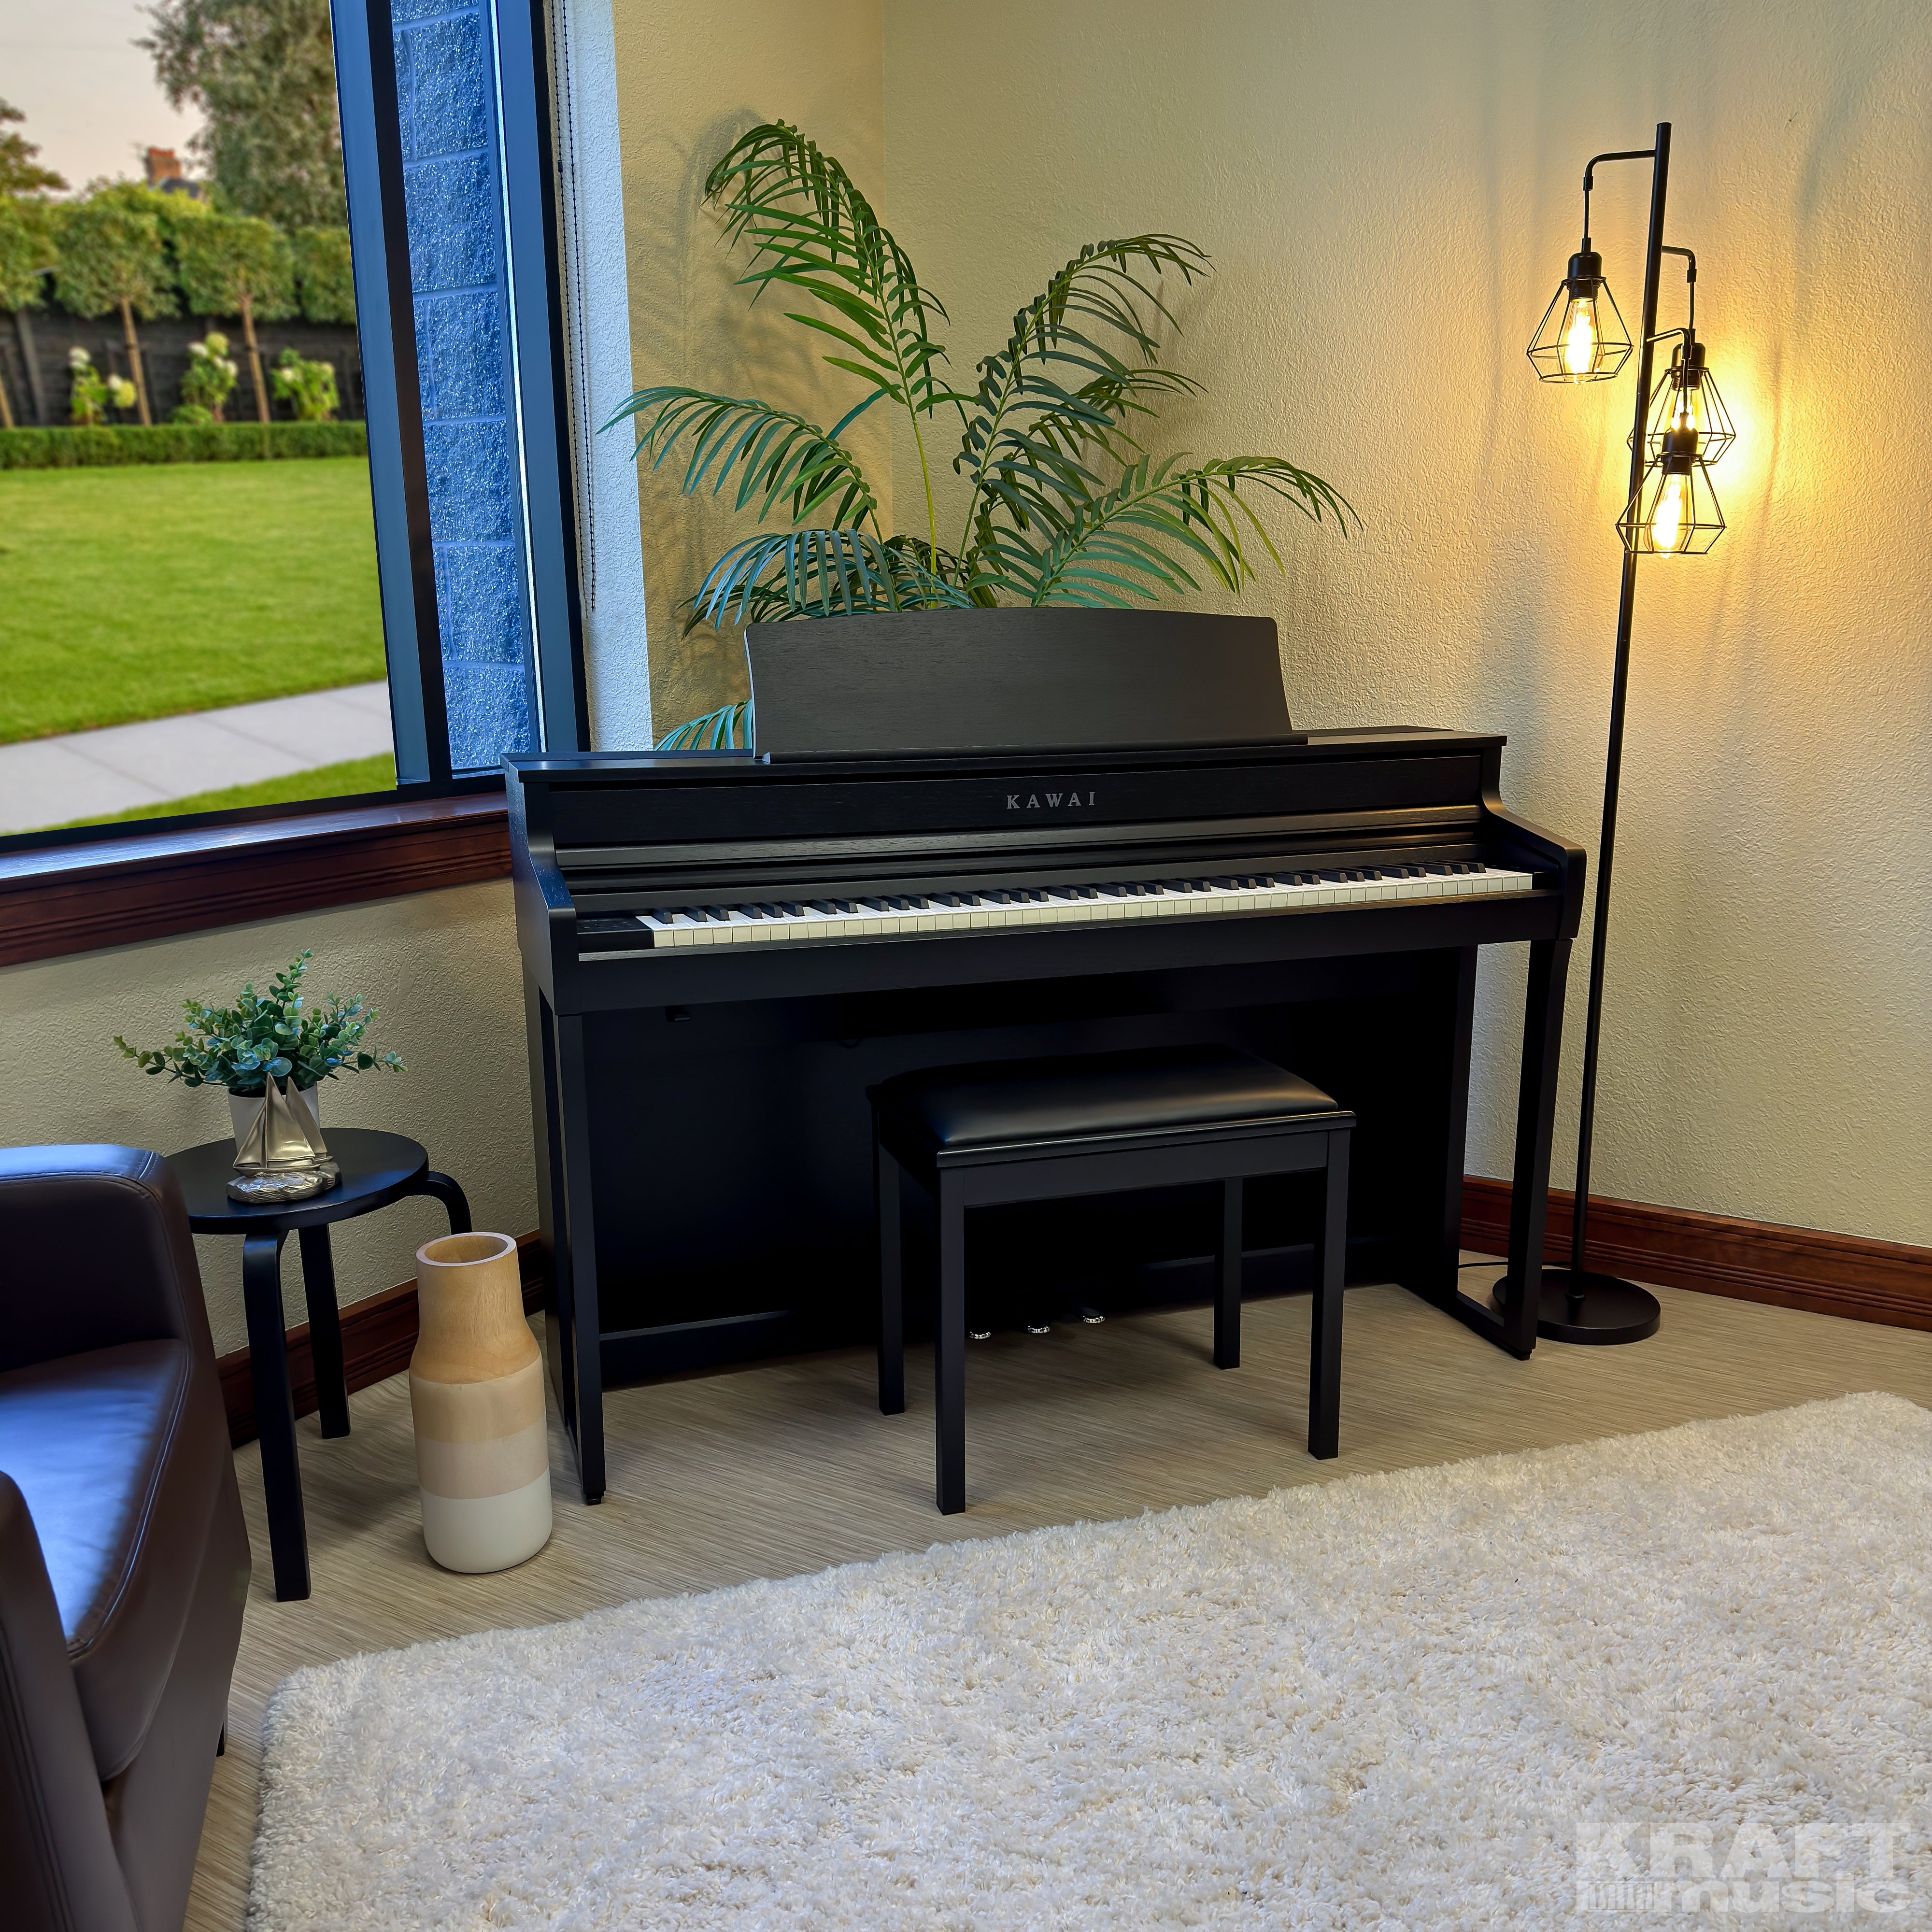 Kawai CA501 Concert Artist Digital Piano - Satin Black - in a stylish living room from the front